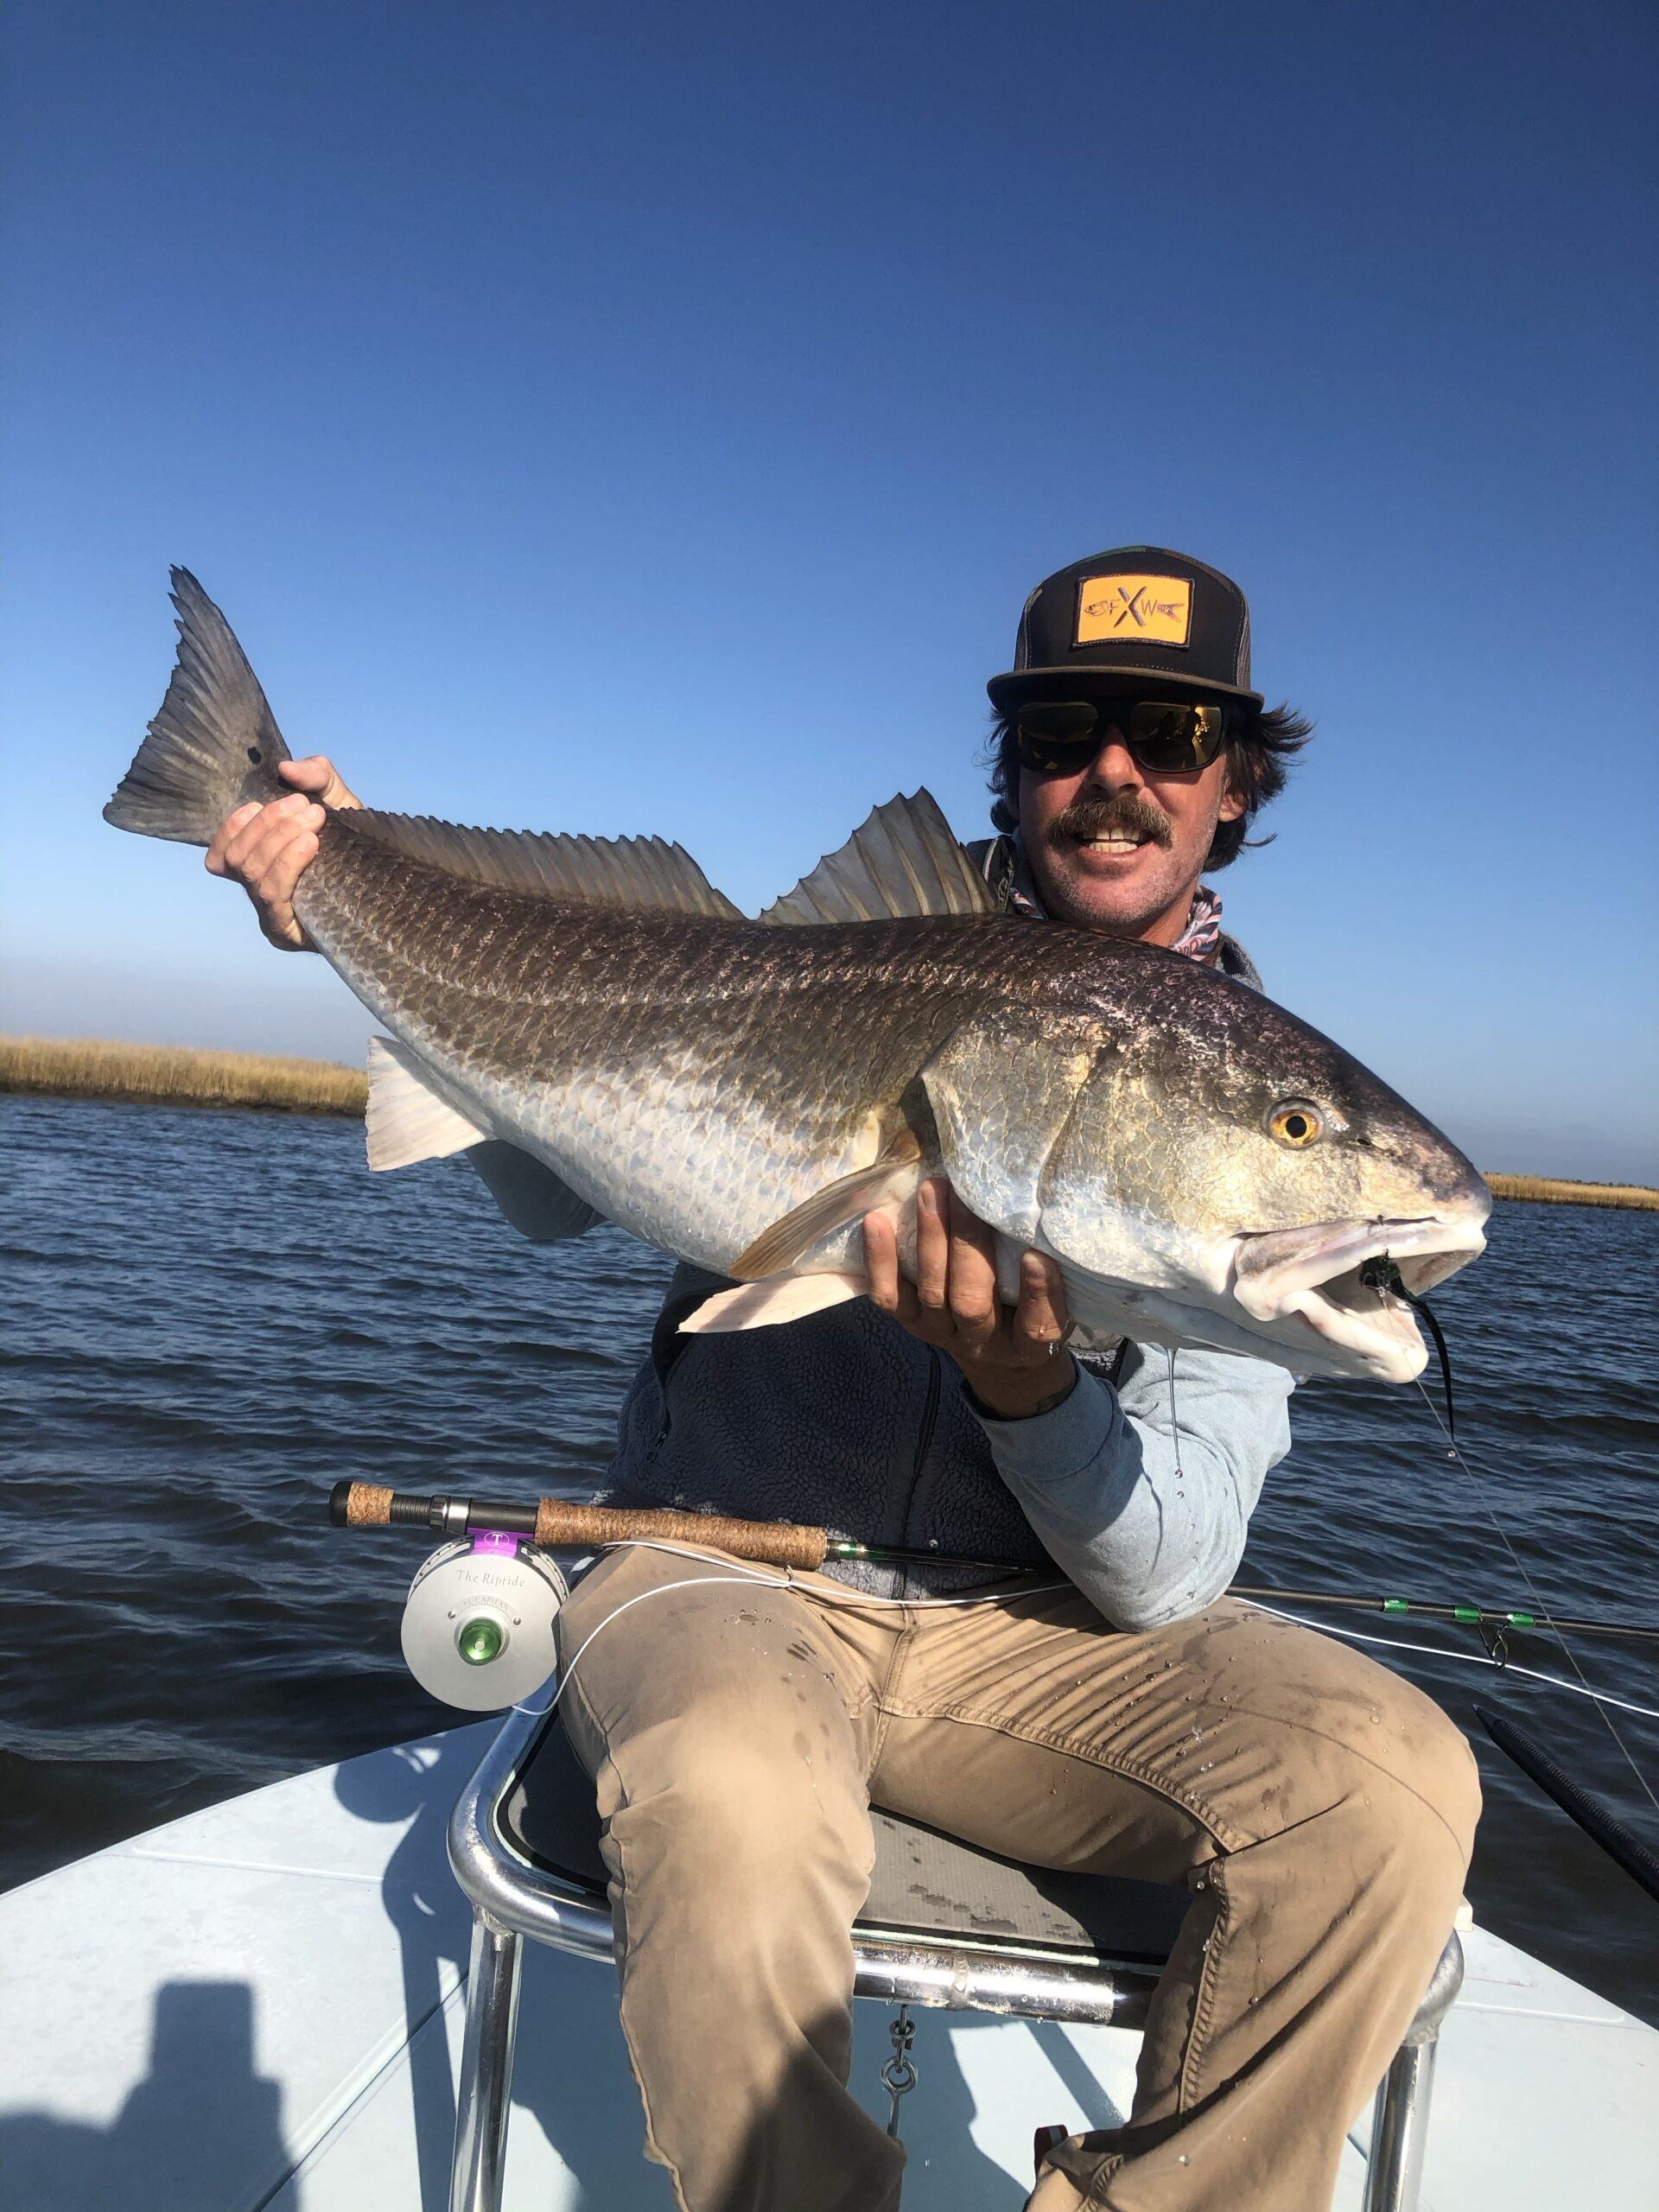 Captain Paul Out on the water with a Louisiana Red Fish he caught.